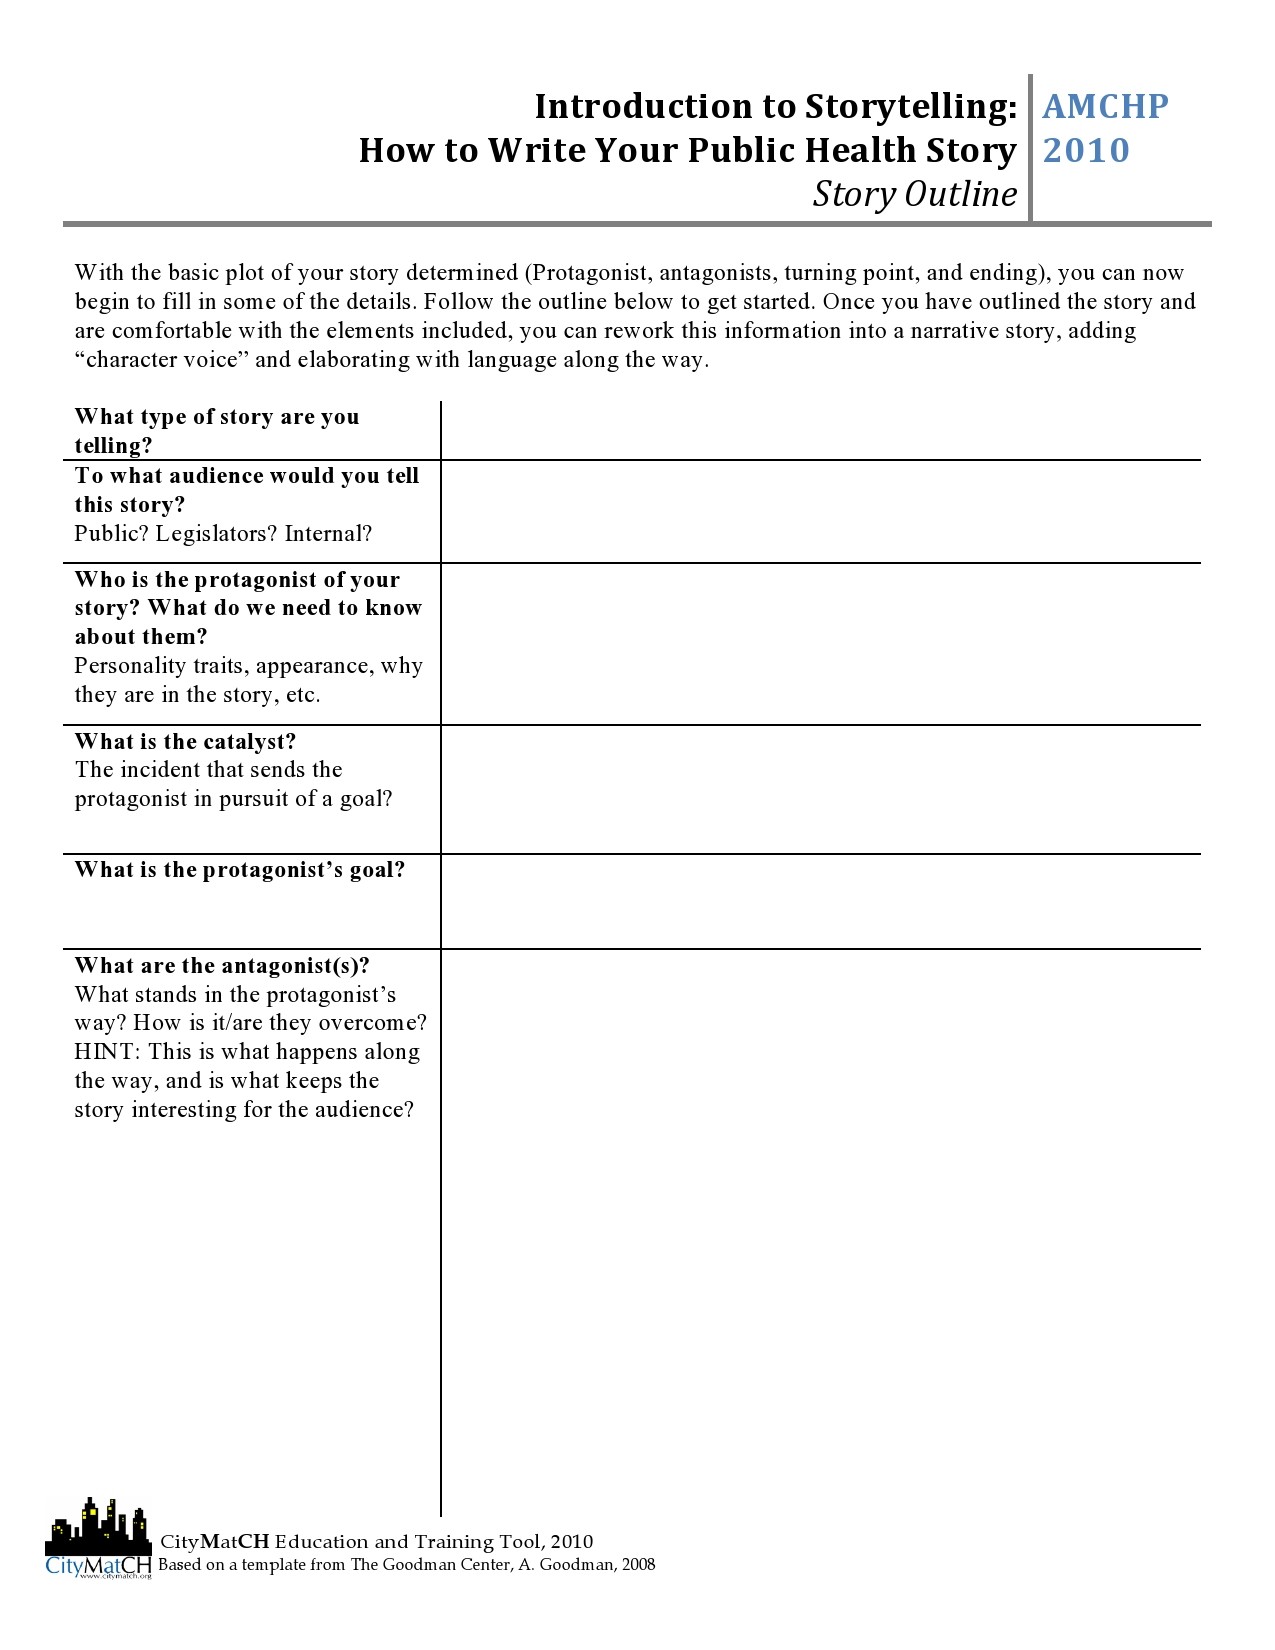 Free story outline template 08